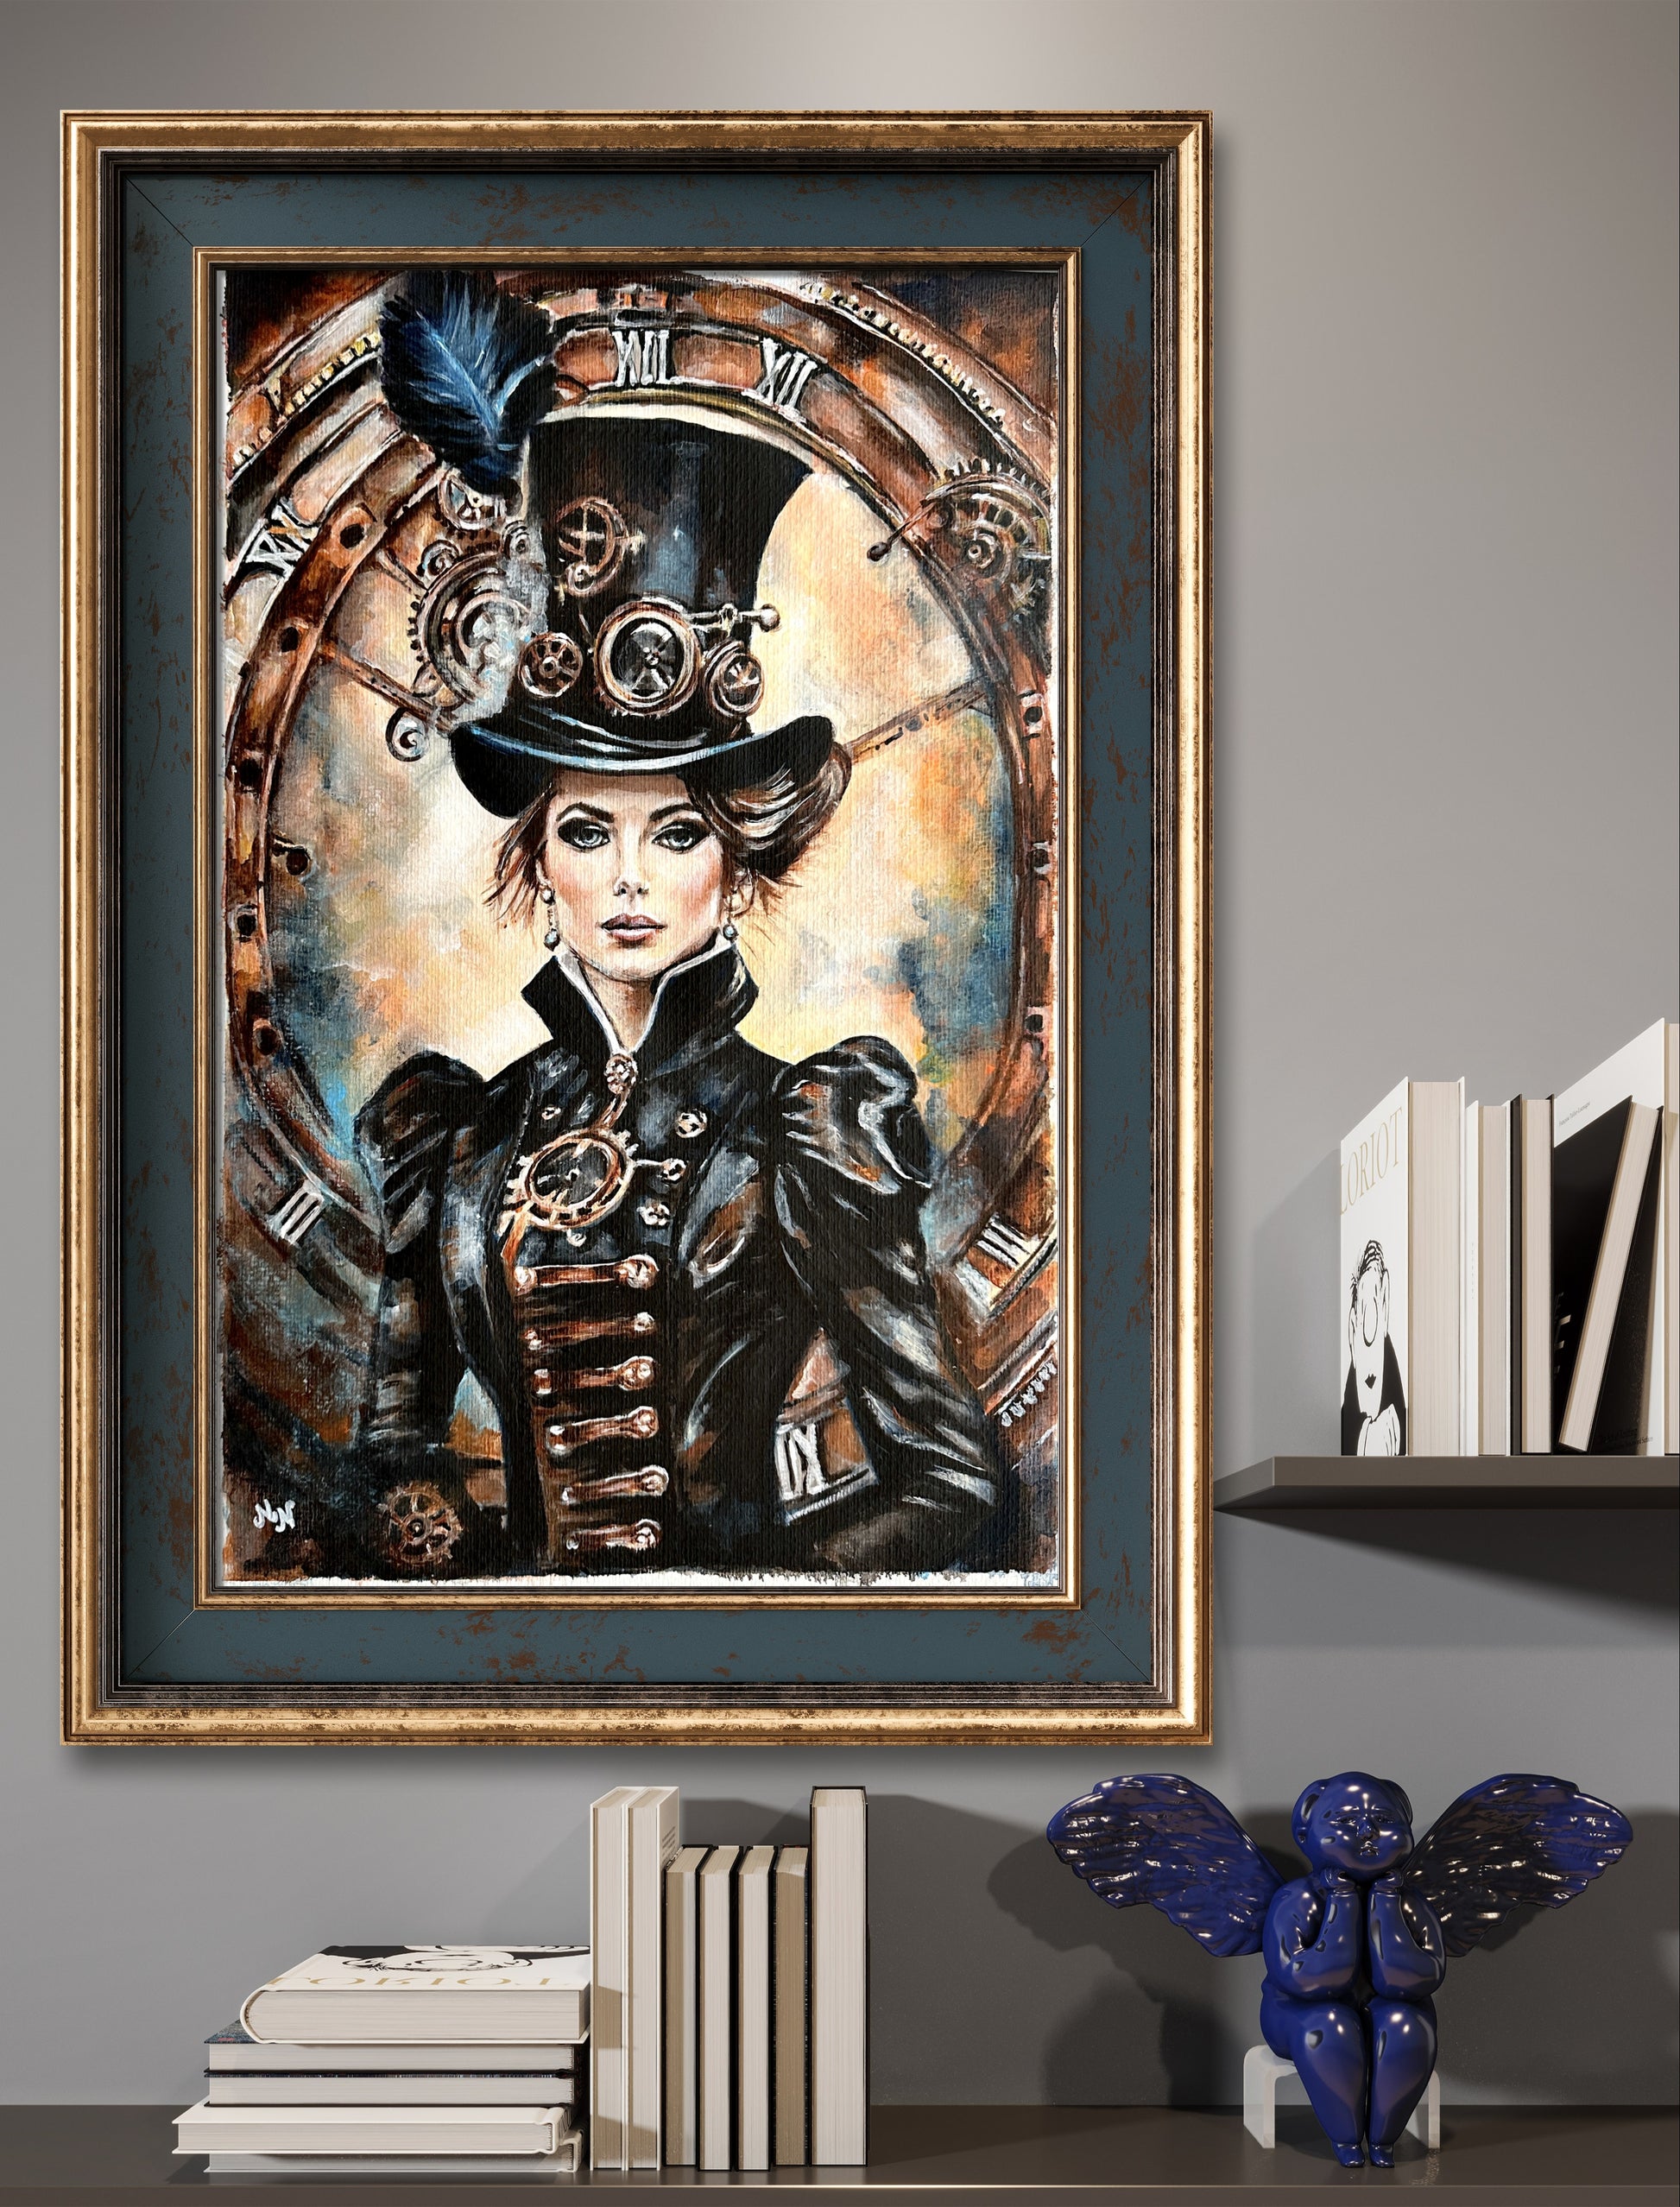 Steampunk Lady: Artwork evoking warmth and vintage luxury with rich tones of brown and navy.